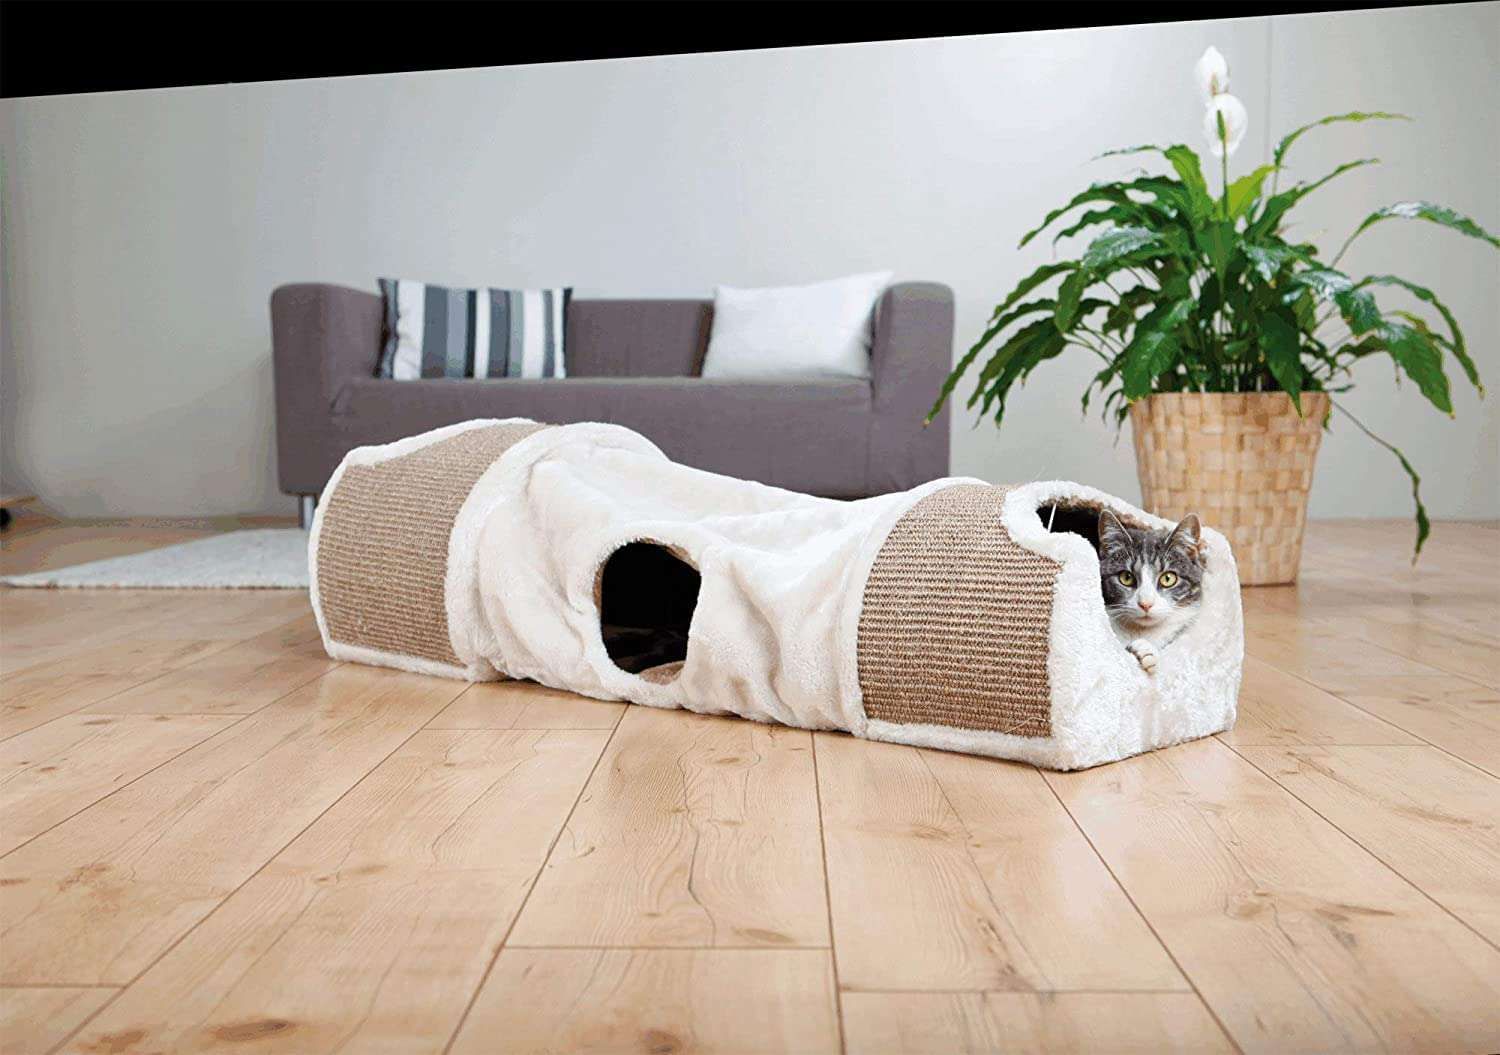 Best products for your pet, Press profile homify Press profile homify Daha fazla oda